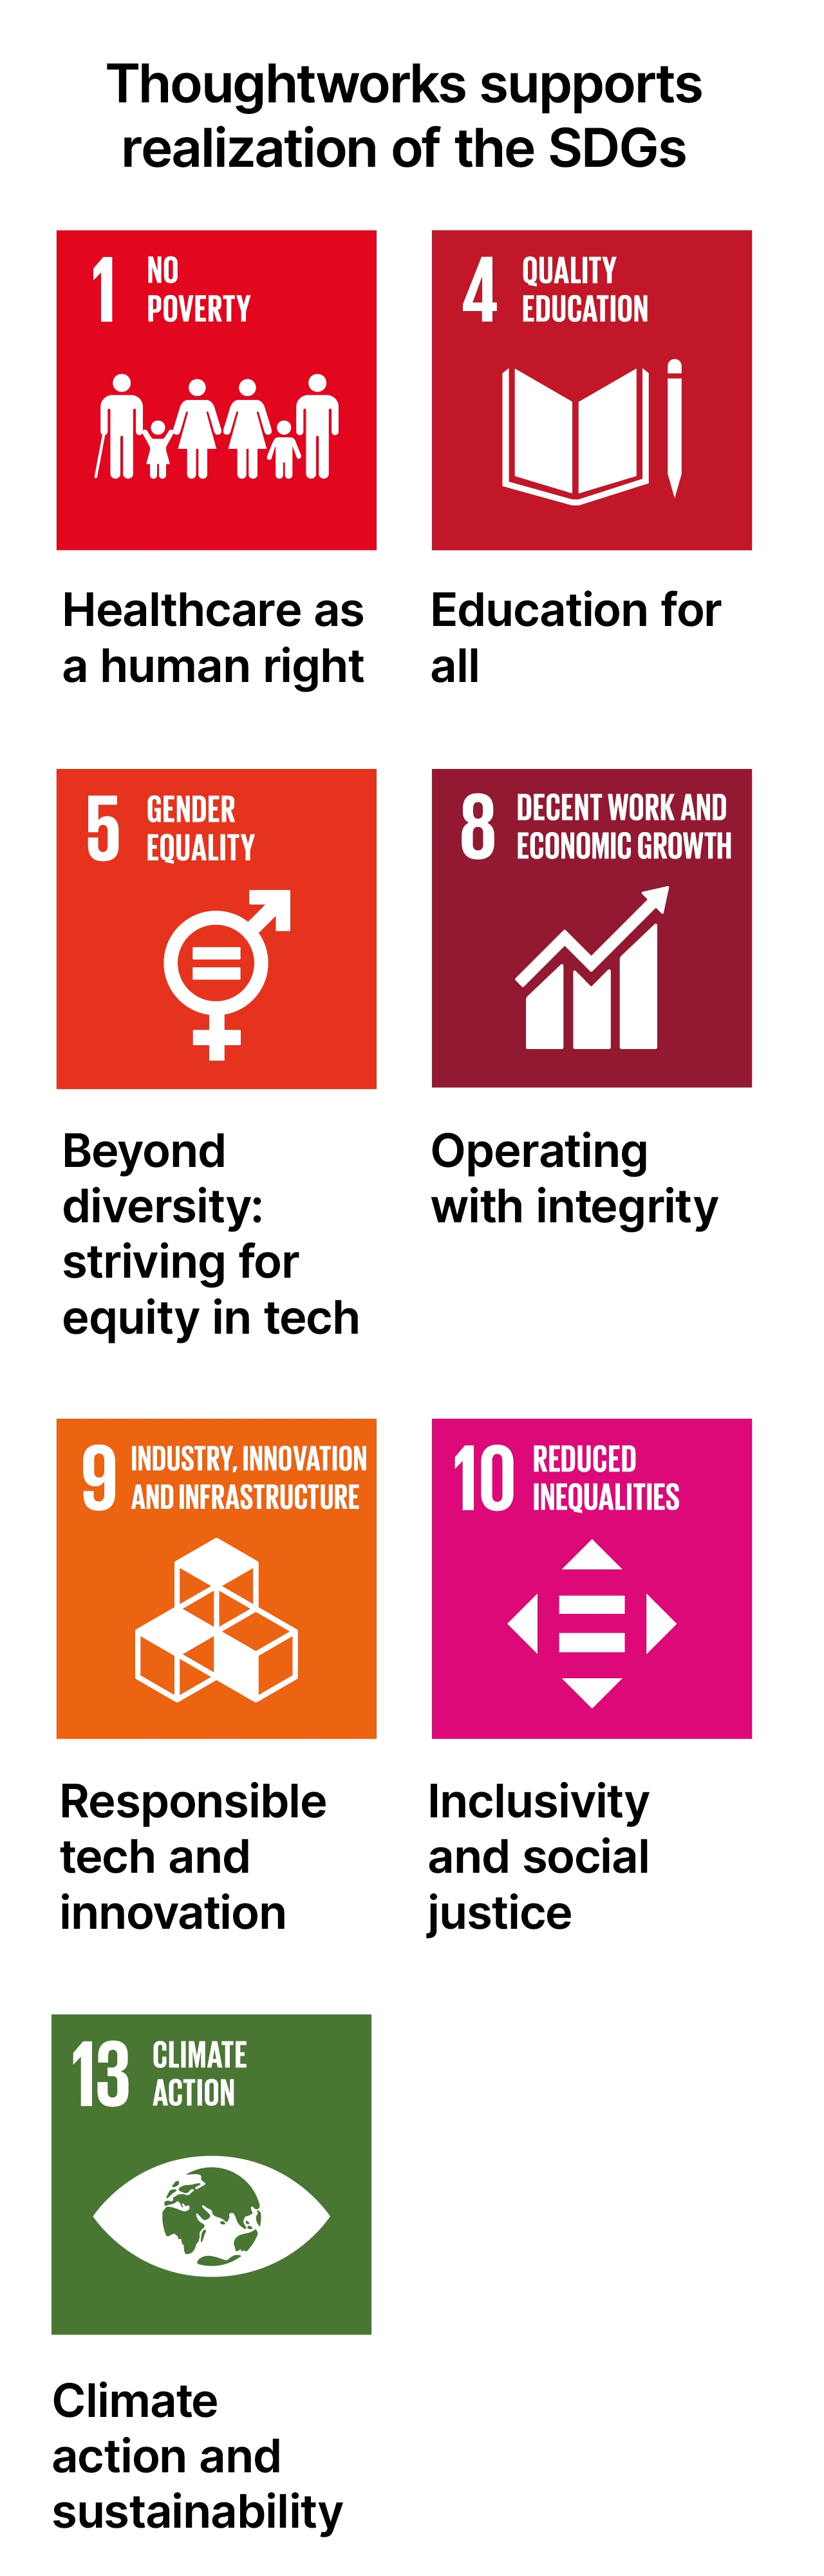 Thoughtworks supports specific SDGs:  (3) Healthcare as a human right, (4) Education, (5) Beyond diversity, (8) Operating with integrity, (9) Responsible tech, (10) Inclusivity and social justice, (13) sustainability and climate action